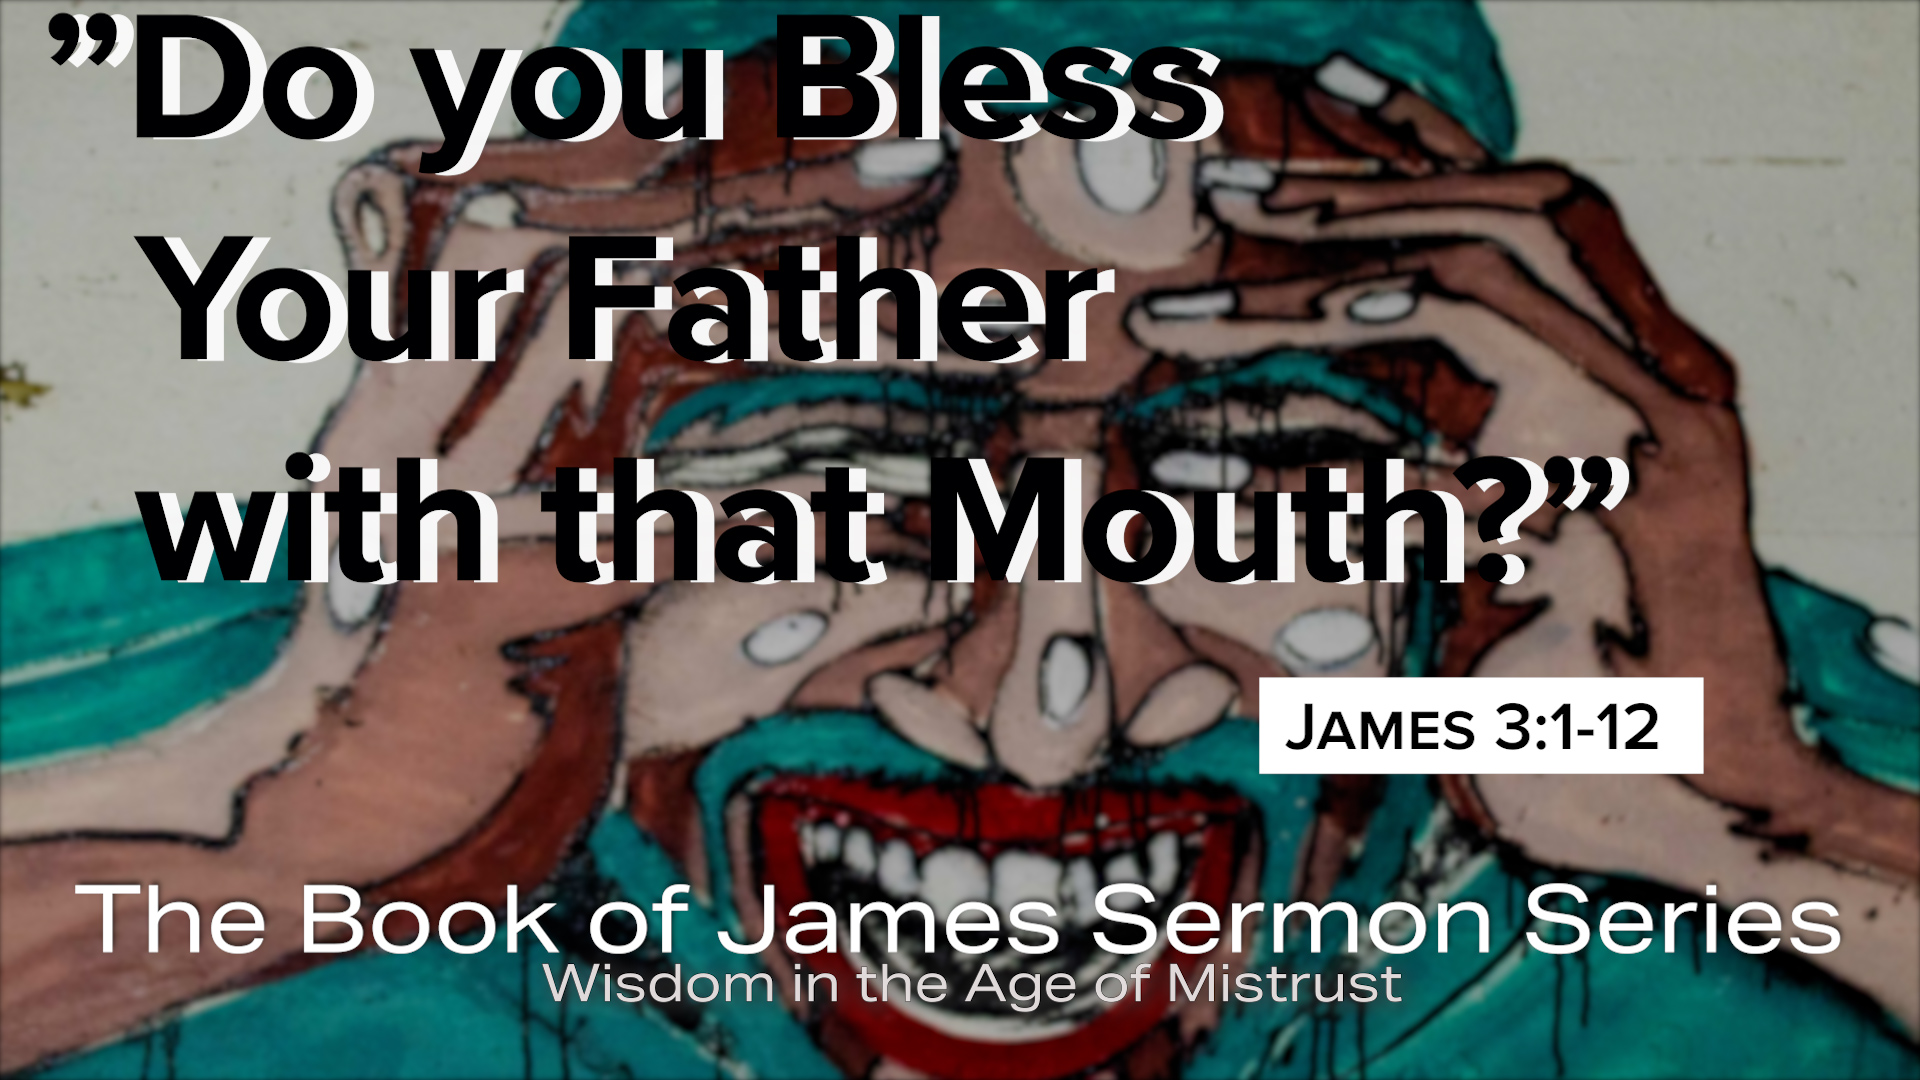 “Do You Bless Your Father with that Mouth?”